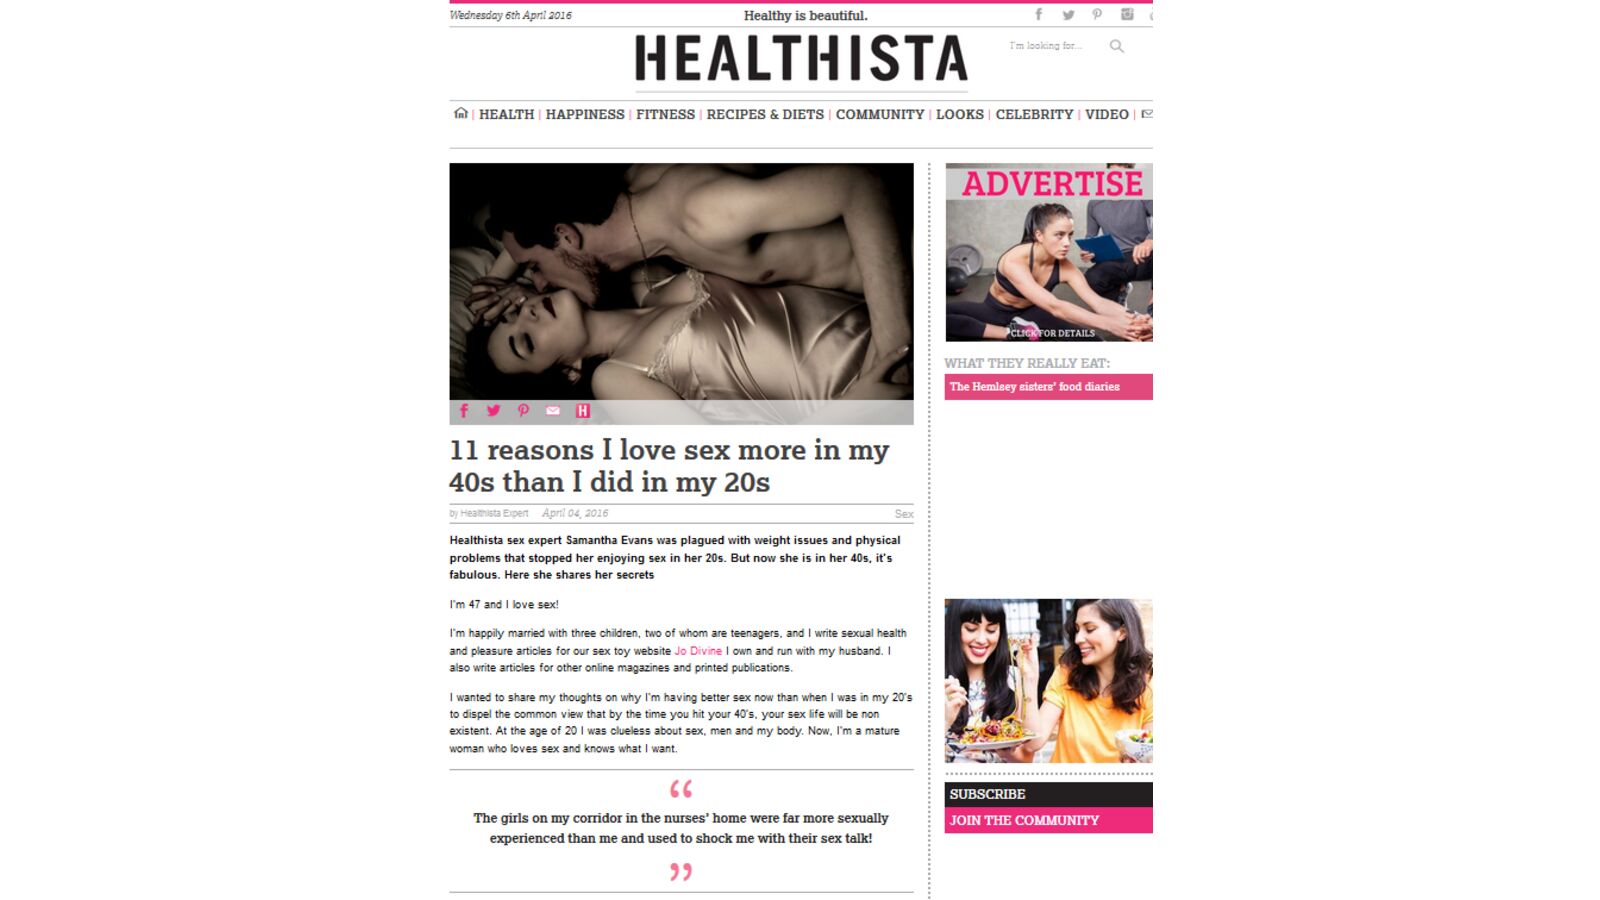 11 reasons I love sex more in my 40s than I did in my 20s - Healthista